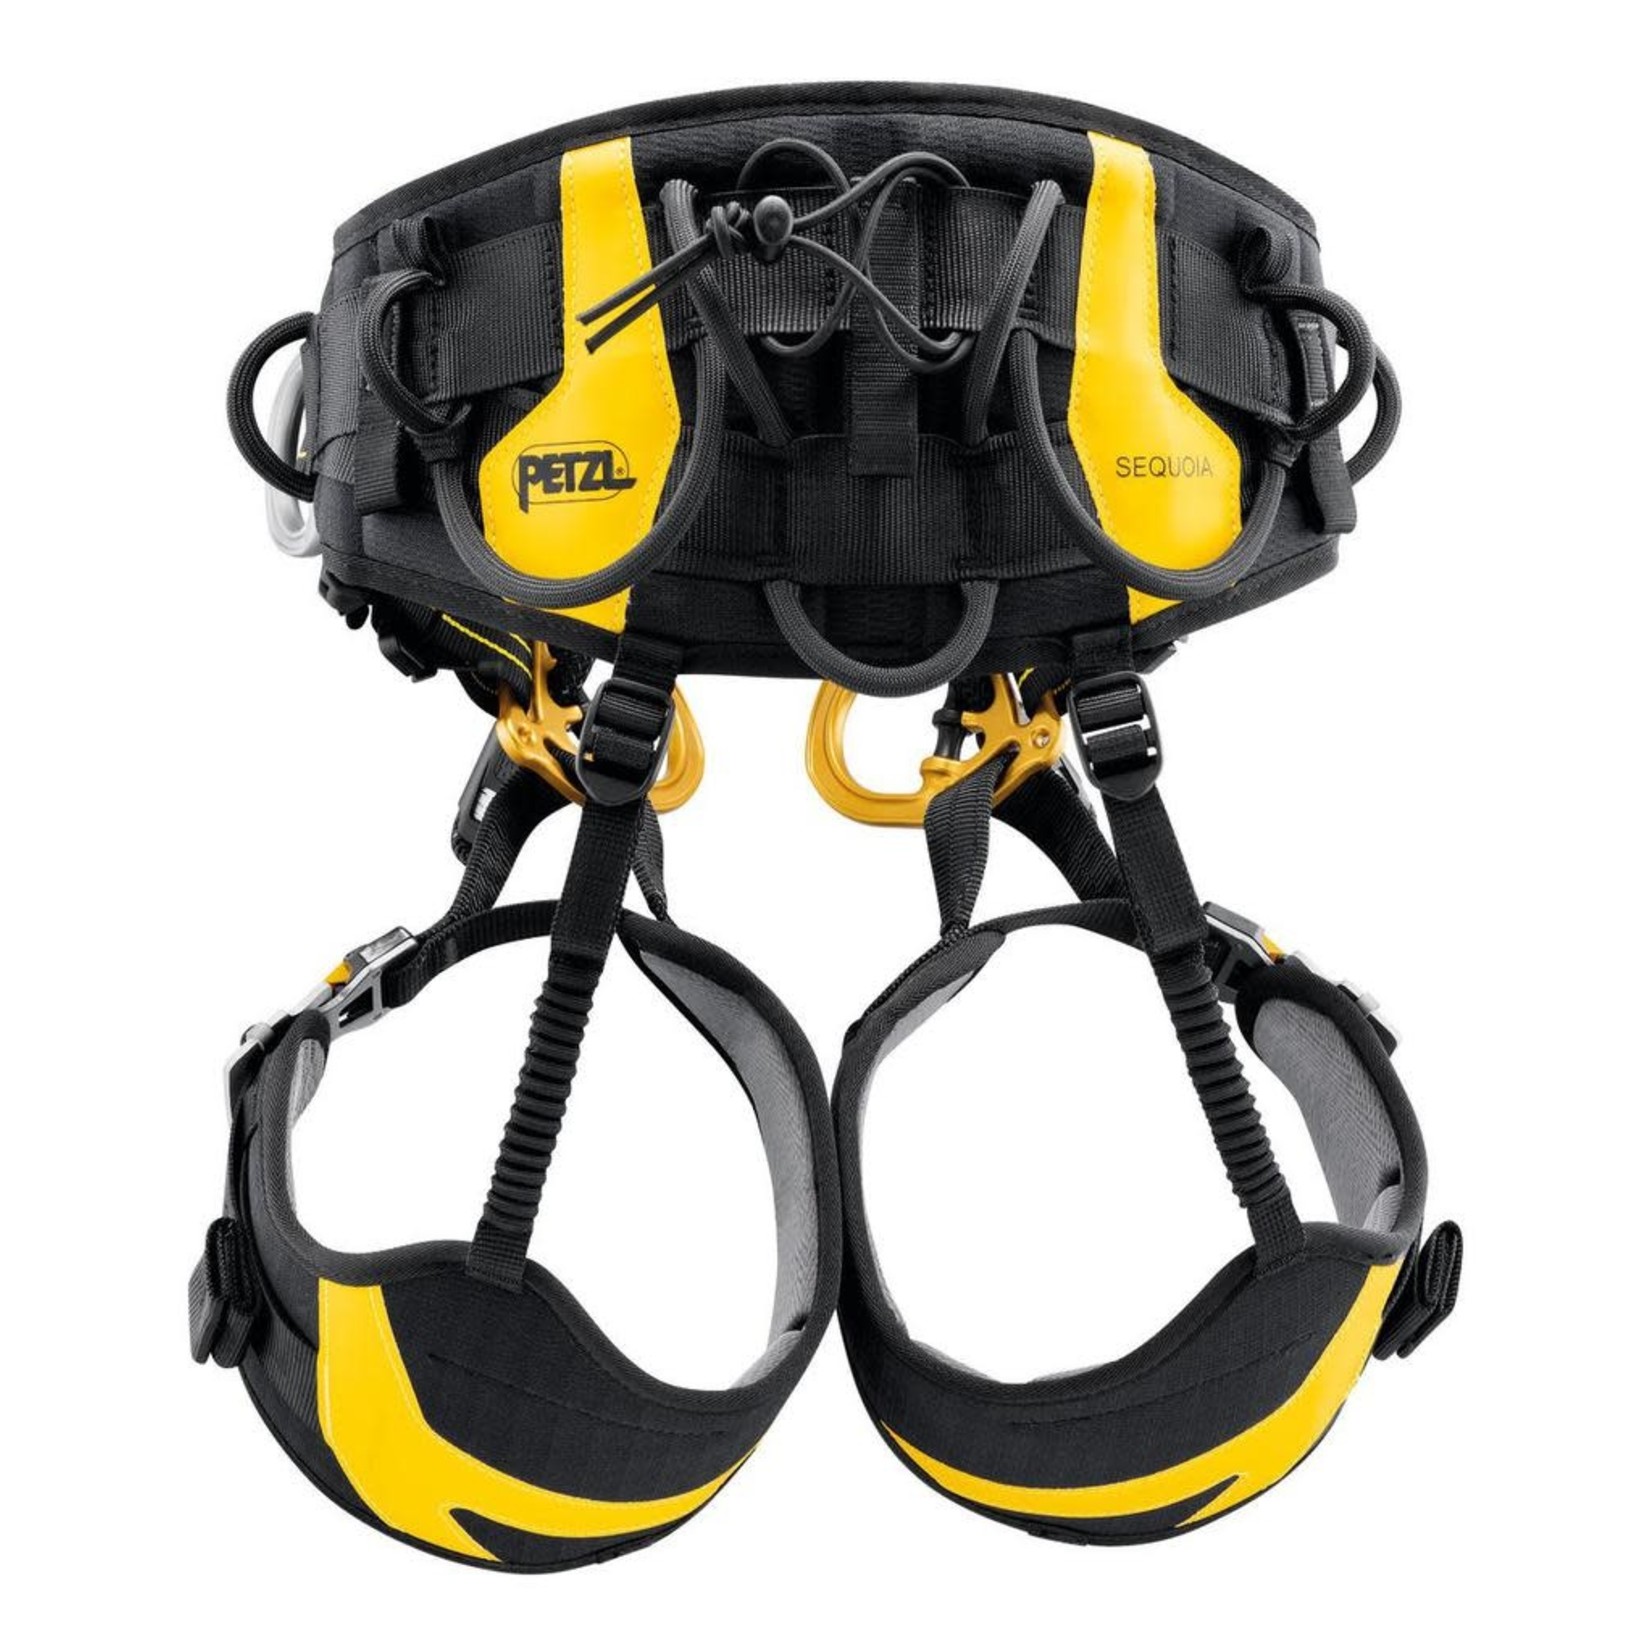 Petzl Sequoia Arborist Saddle, Size 2, Tree Care Seat Harness For Doubled-Rope Ascent Techniques